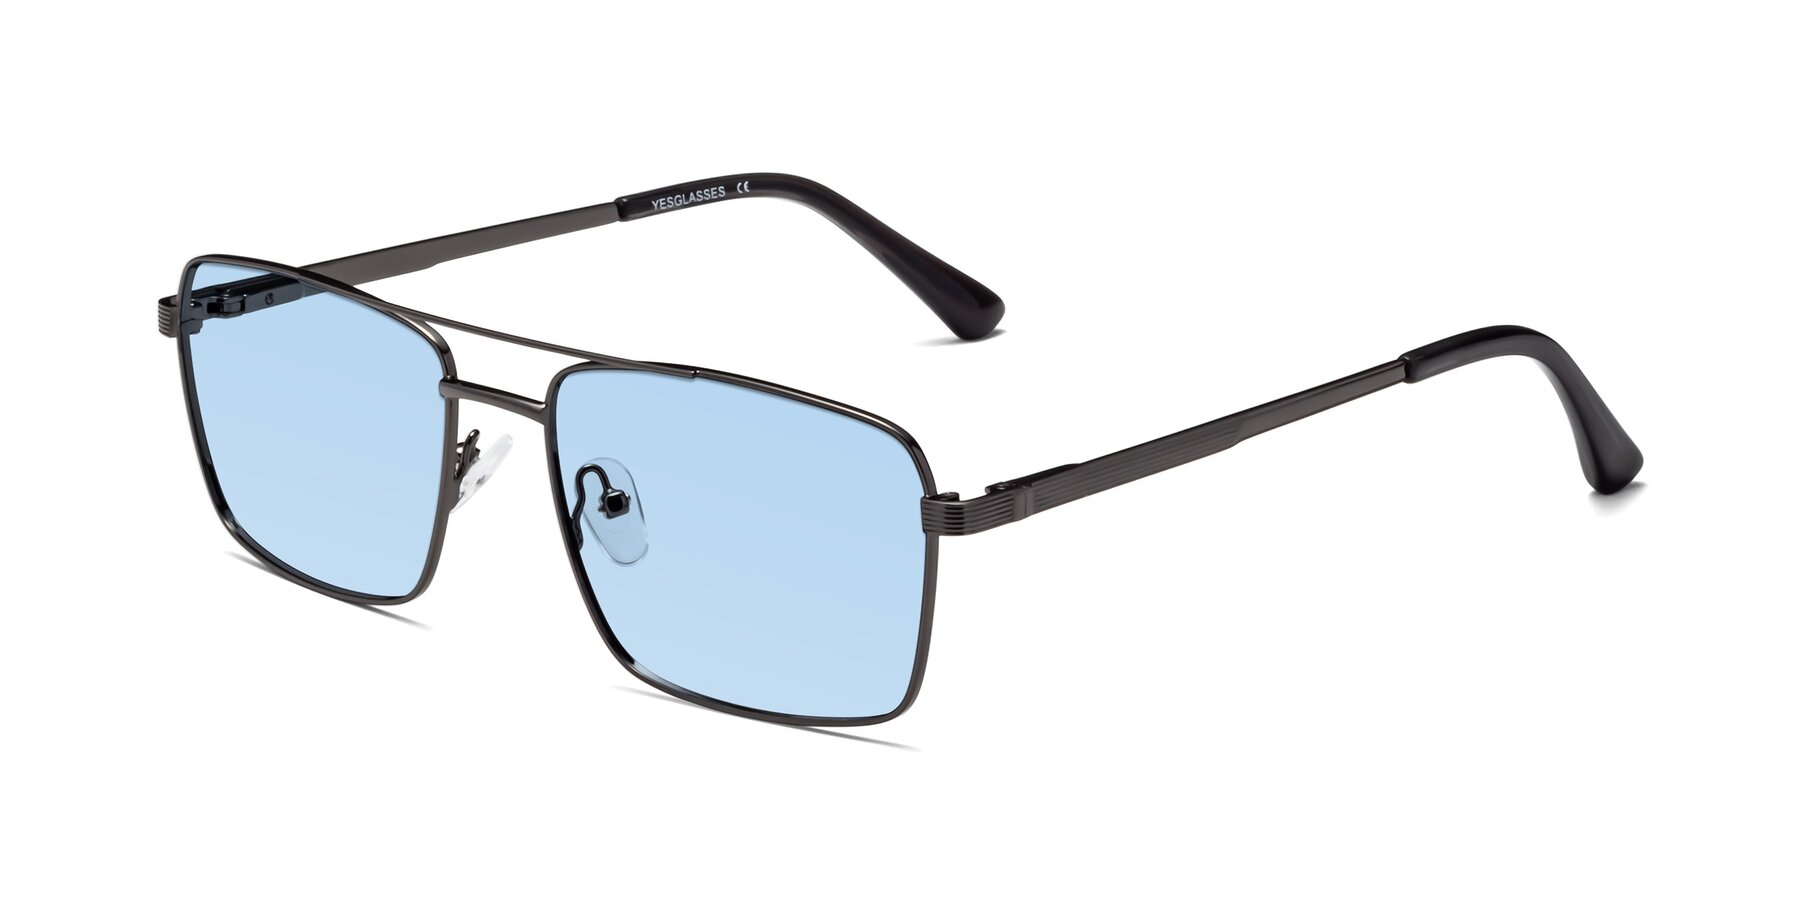 Angle of Beckum in Gunmetal with Light Blue Tinted Lenses